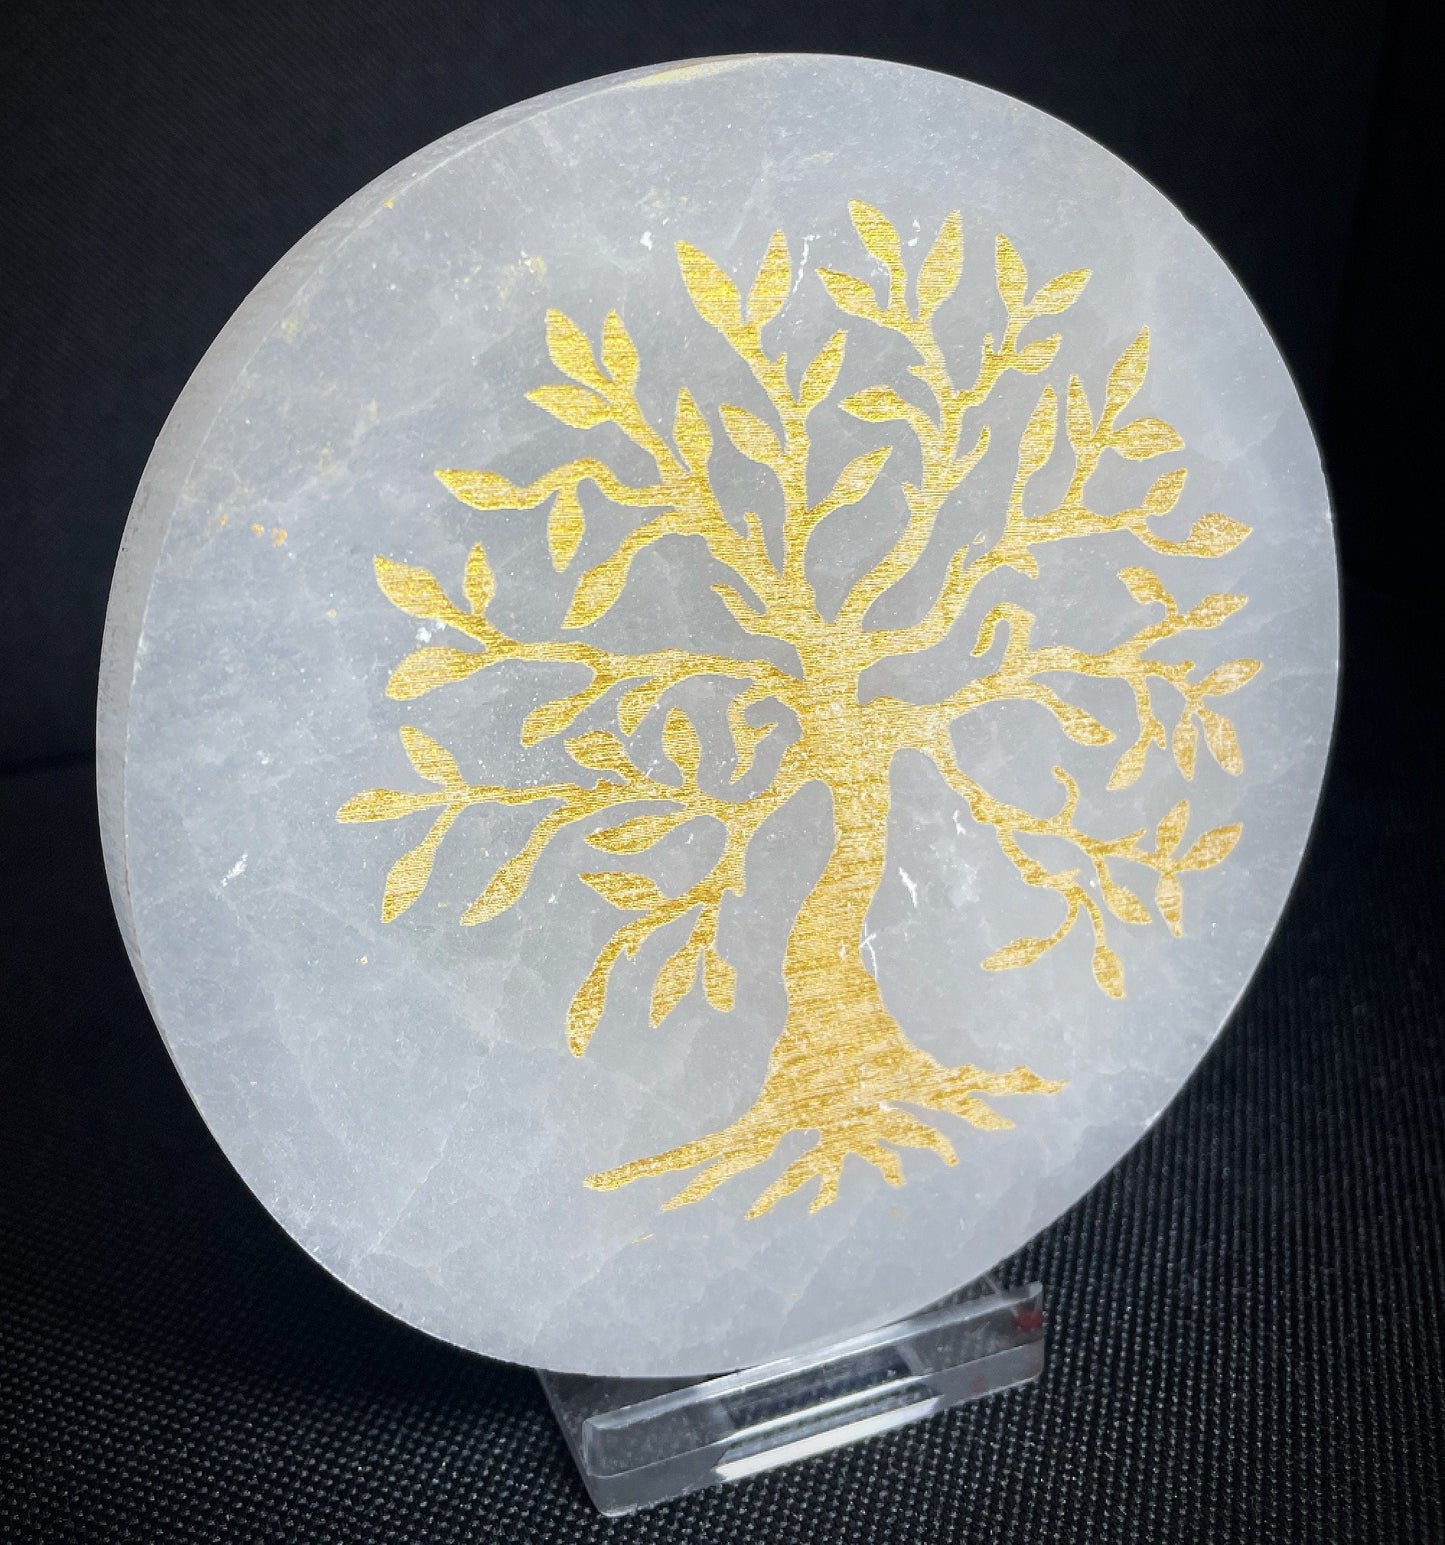 Gorgeous Selenite Tree Of Life Circle Gold Leaf Hand Crystal Charging Plate disc From Morocco